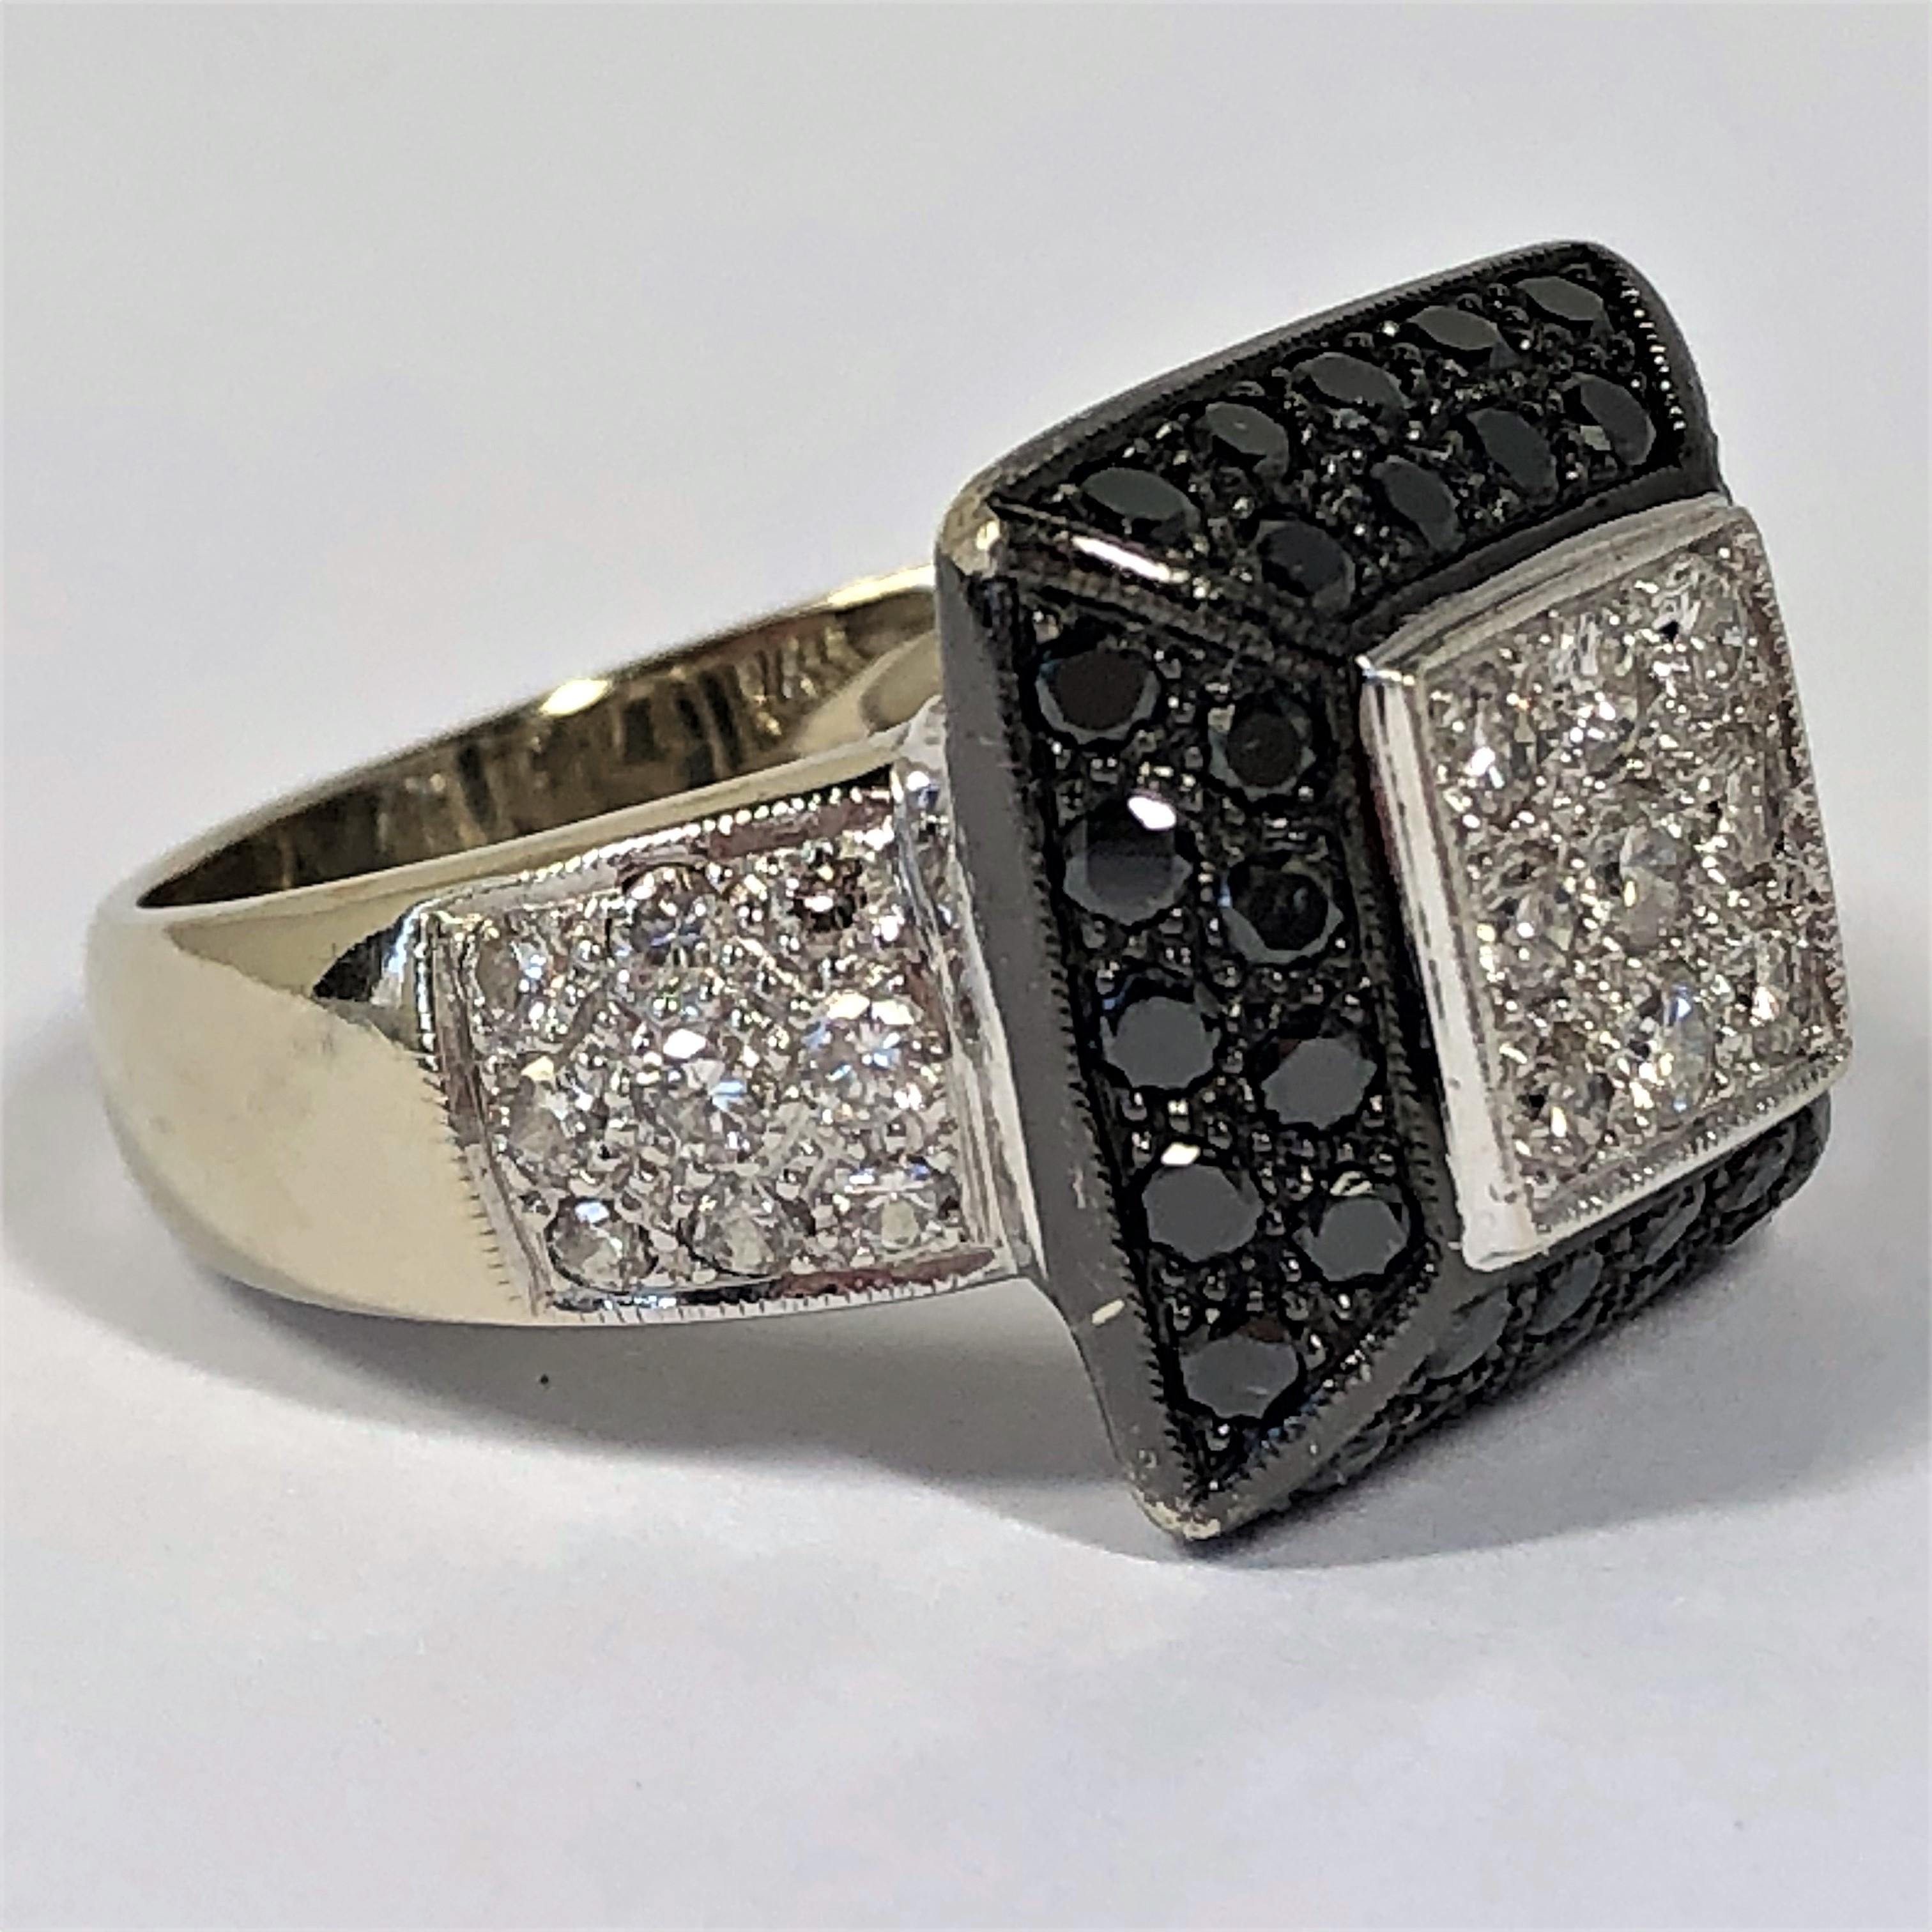 This contemporary 14K White Gold ring is set with 36 black diamonds weighing an approximate total of 2.00CT and with 27 round brilliant cut diamonds weighing an approximate total of 1.00CT of overall G/H Color and VS1 Clarity. The decorative center